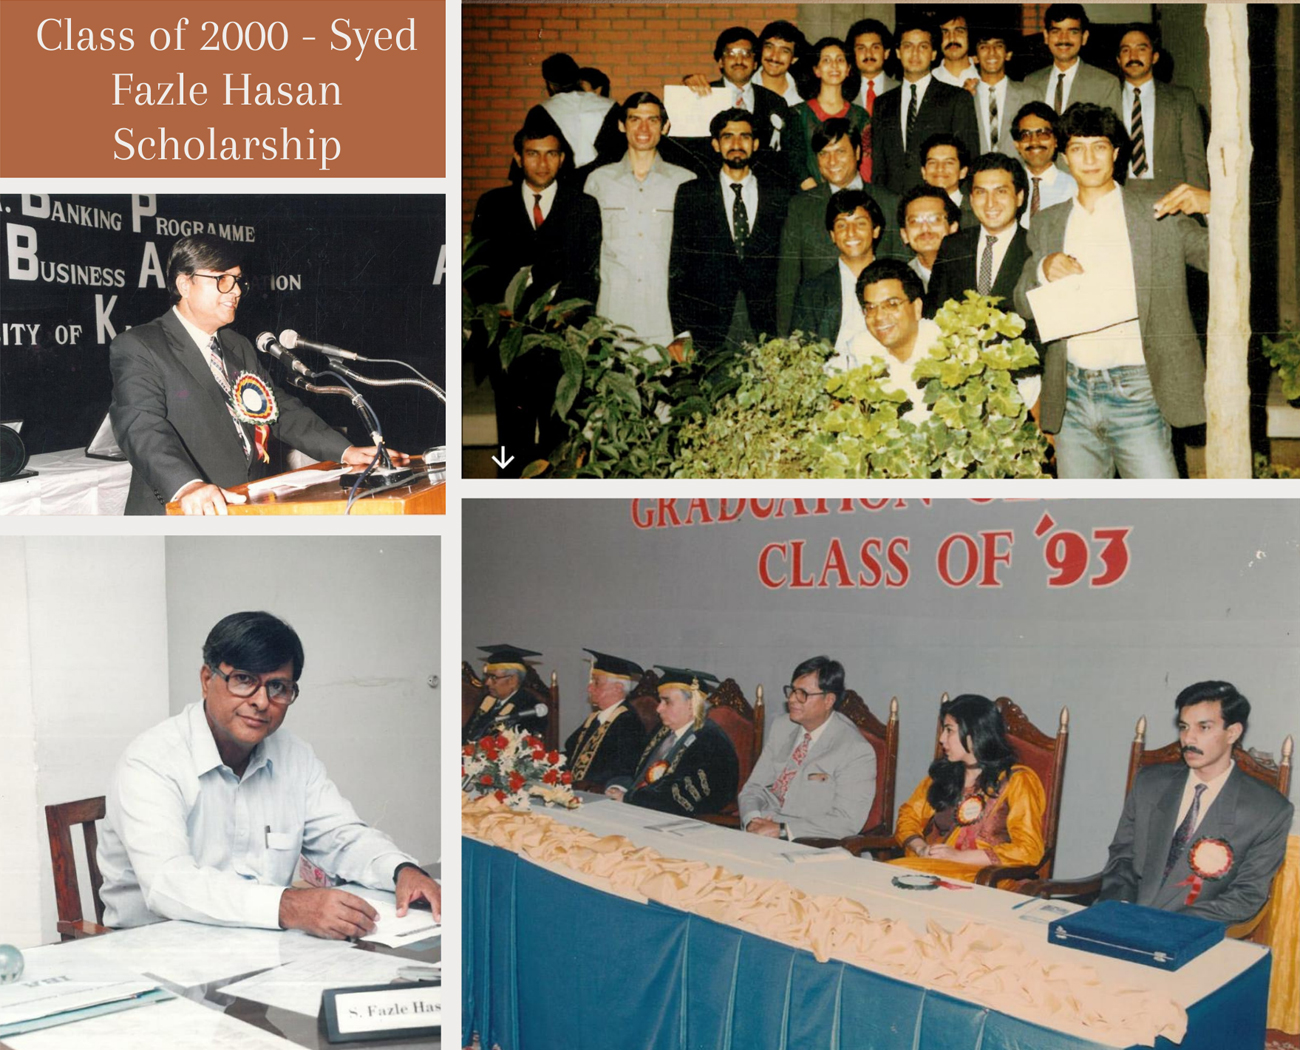 Class of 2000 set up 'Syed Fazle Hasan Endowment Fund' in memory of faculty member